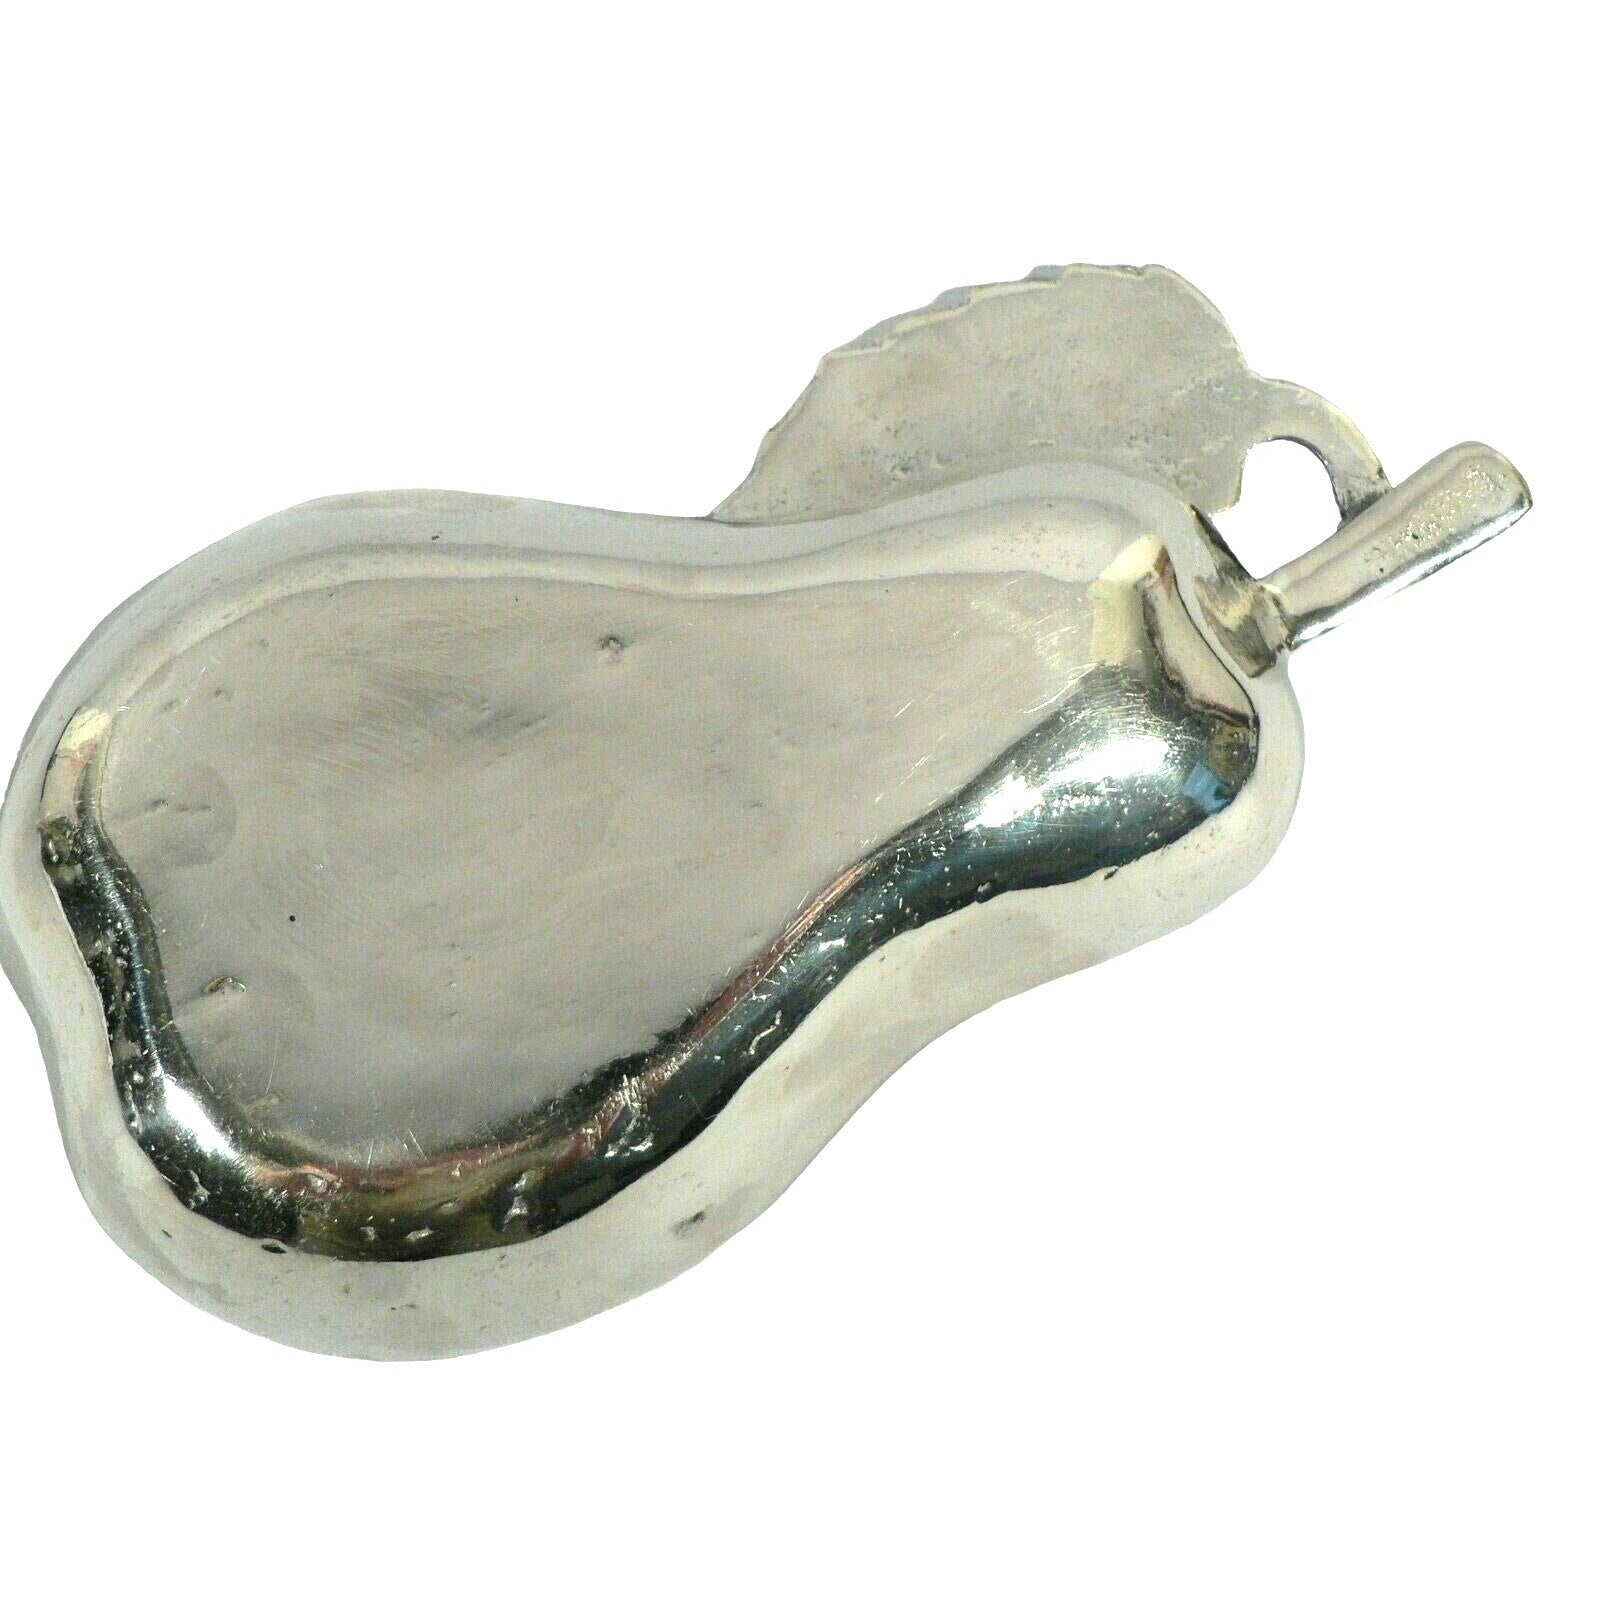 Condiment Nut Candy Dish, Pear Shaped Cast Aluminum Silver Antiqued Finish